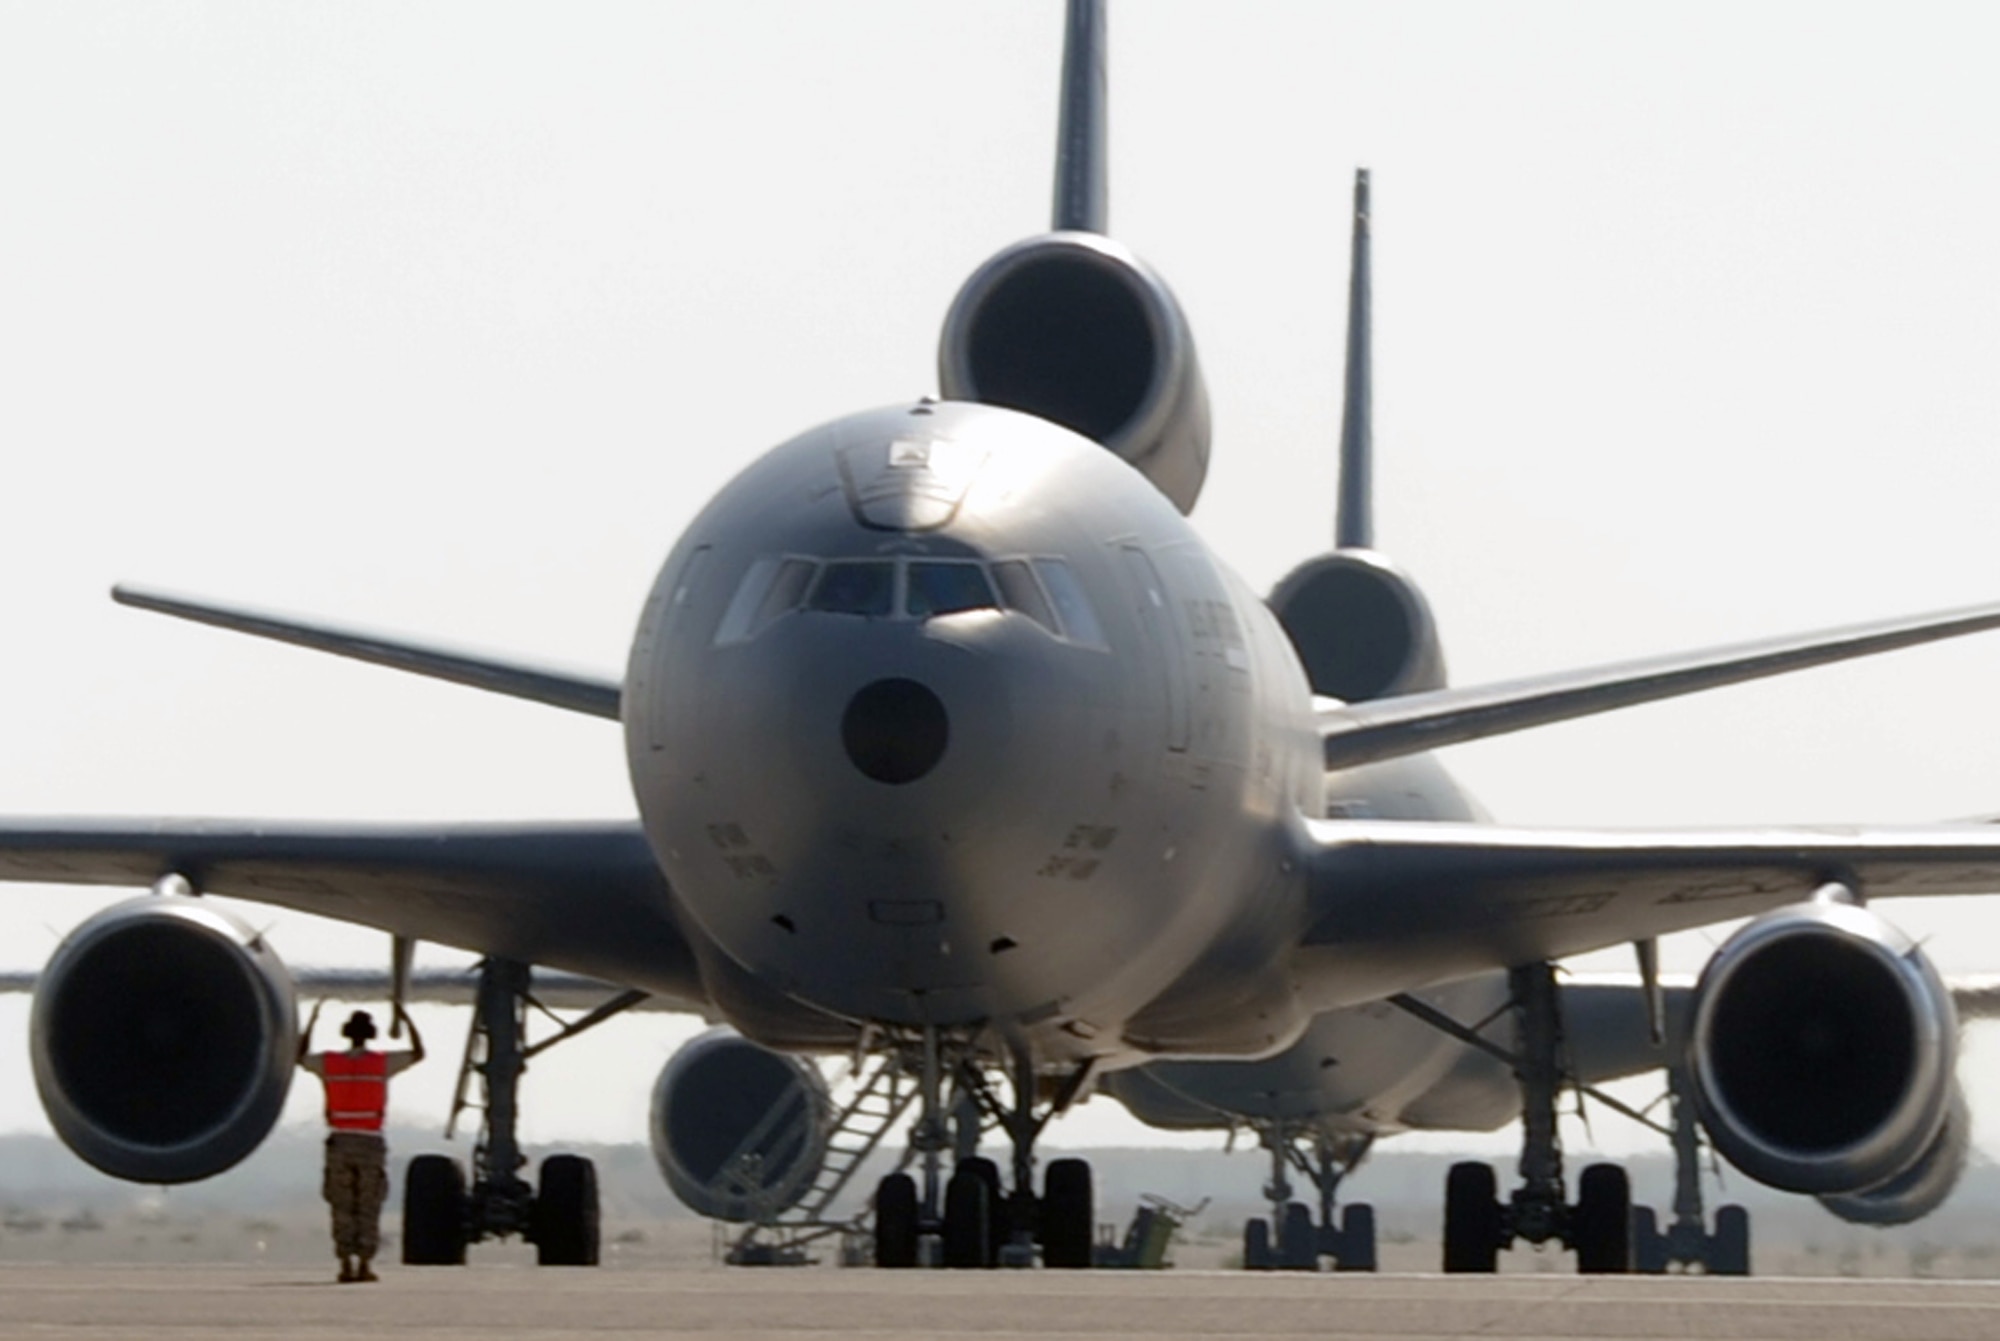 A maintenance Airman directs a KC-10 Extender from its parking area as the plane moves out for a combat air refueling mission during operations on the flightline at a non-disclosed base in Southwest Asia on Jan. 22, 2009. The KC-10, assigned to the 908th Expeditionary Air Refueling Squadron and deployed from Joint Base McGuire-Dix-Lakehurst, N.J., is one of Air Mobility Command's air refueling aircraft deployed to the U.S. Central Command area of responsibility that provides the "global reach" for Air Force and Department of Defense aircraft through air refueling operations for Operations Iraqi Freedom and Enduring Freedom and the Combined Joint Task Force-Horn of Africa. (U.S. Air Force Photo/Tech. Sgt. Scott T. Sturkol/Released)